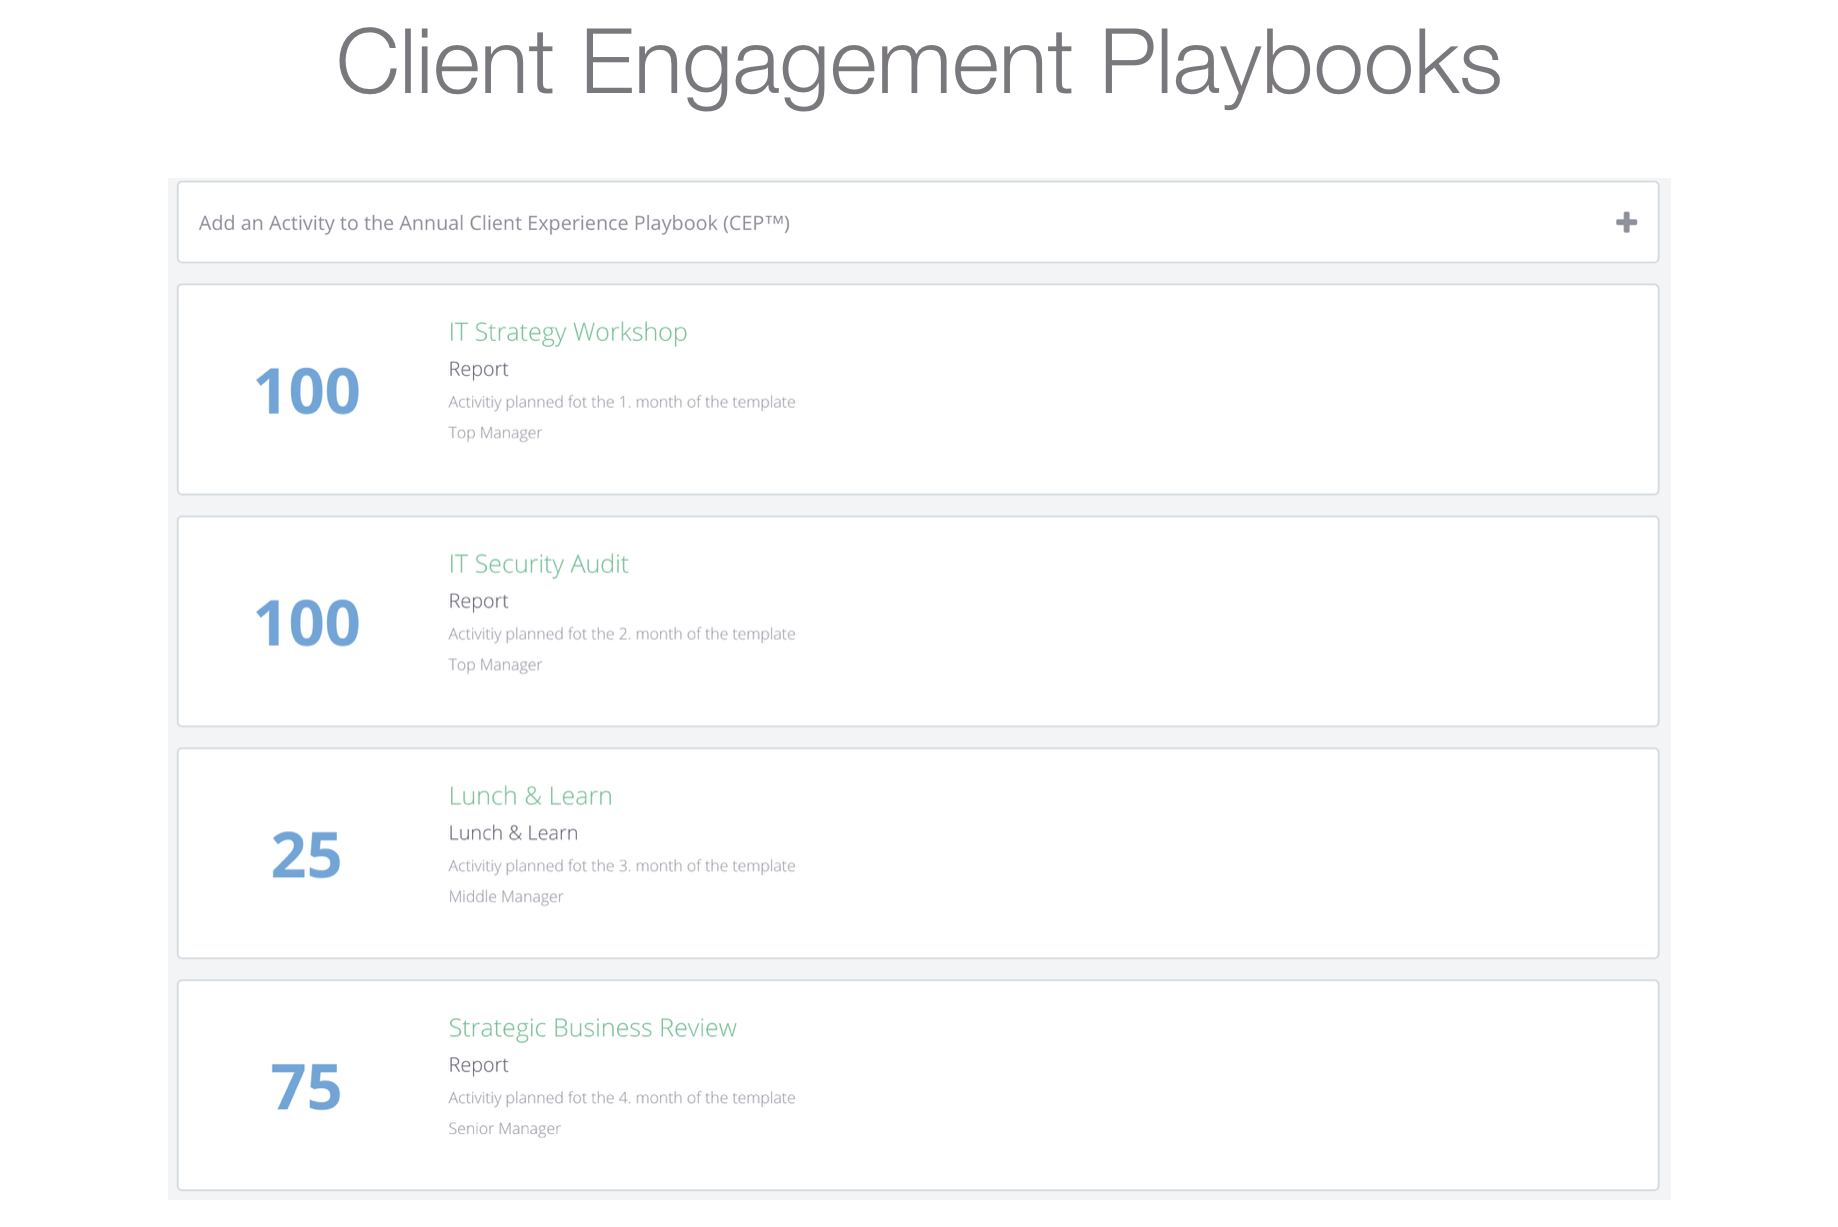 Predefined Client Playbooks